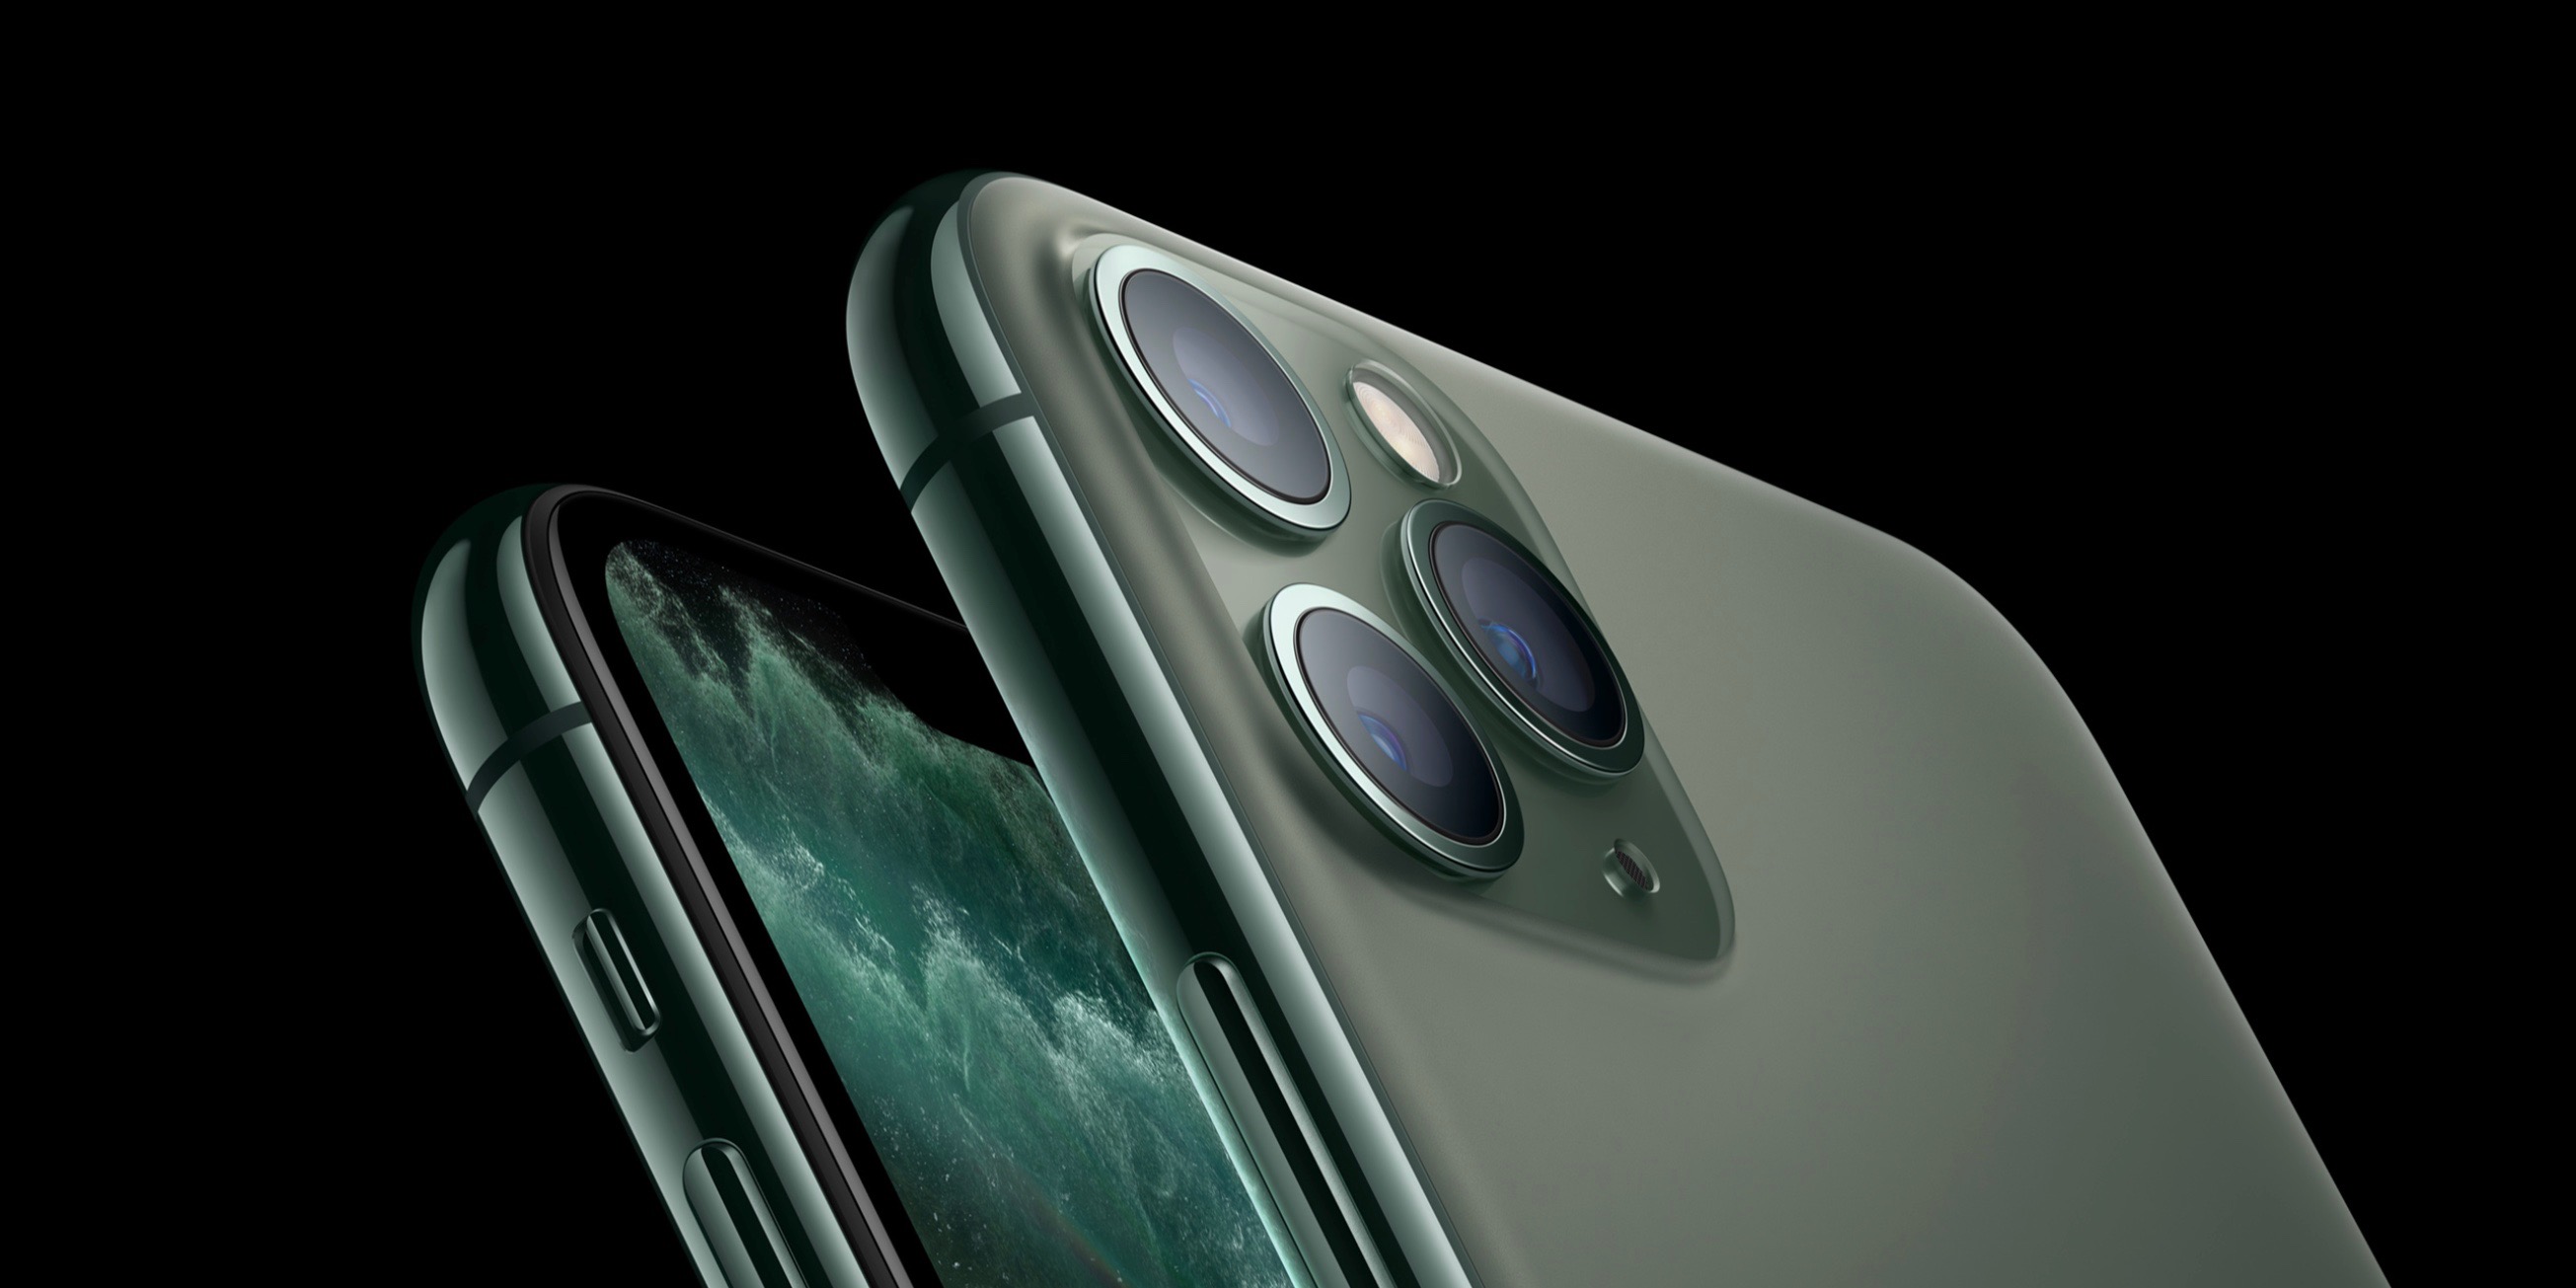 iPhone 11 Pro review roundup: massive jump in camera quality